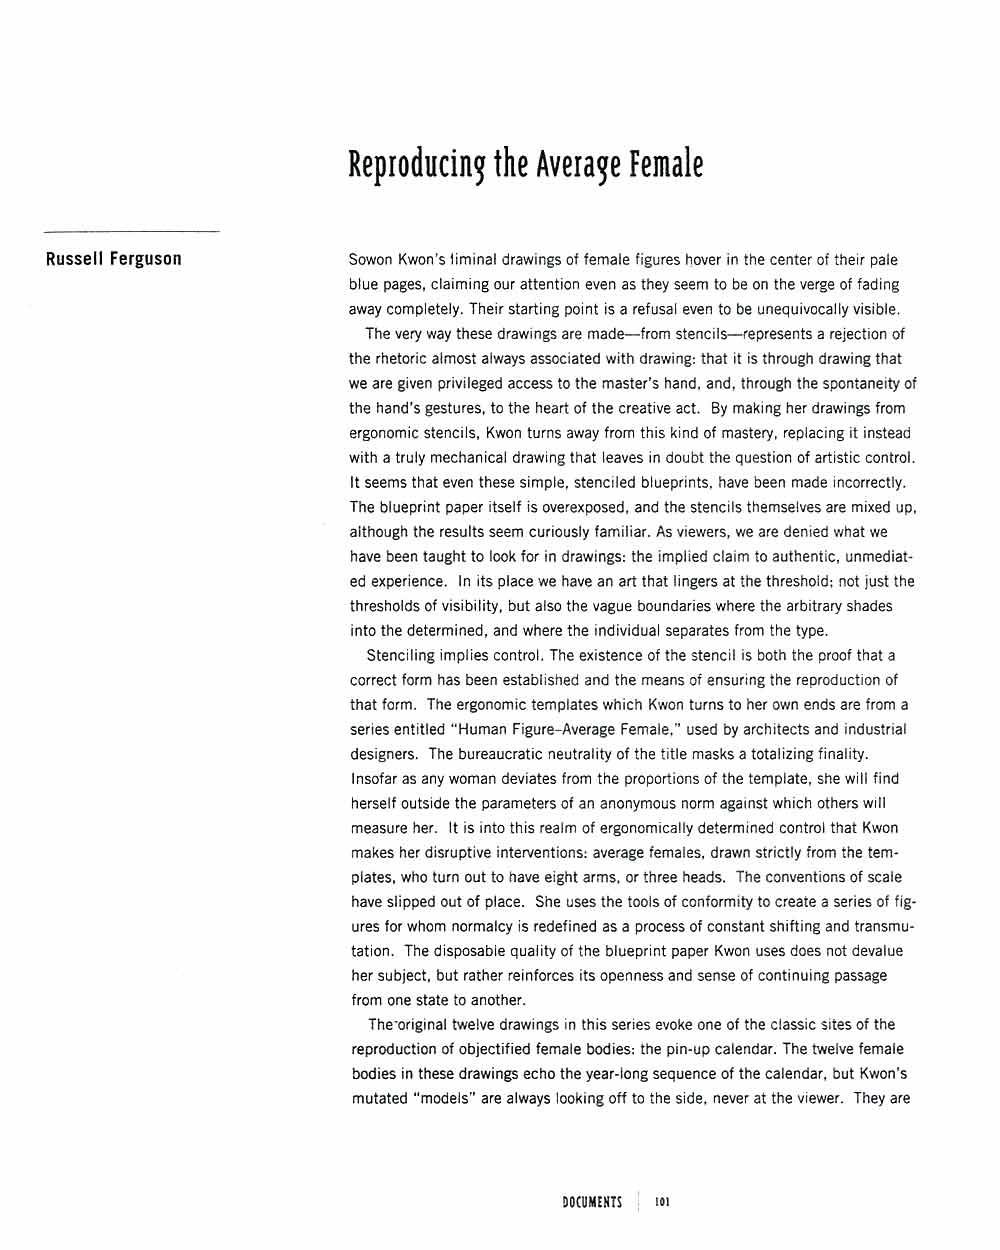 Reproducing the Average Female, article, pg 1